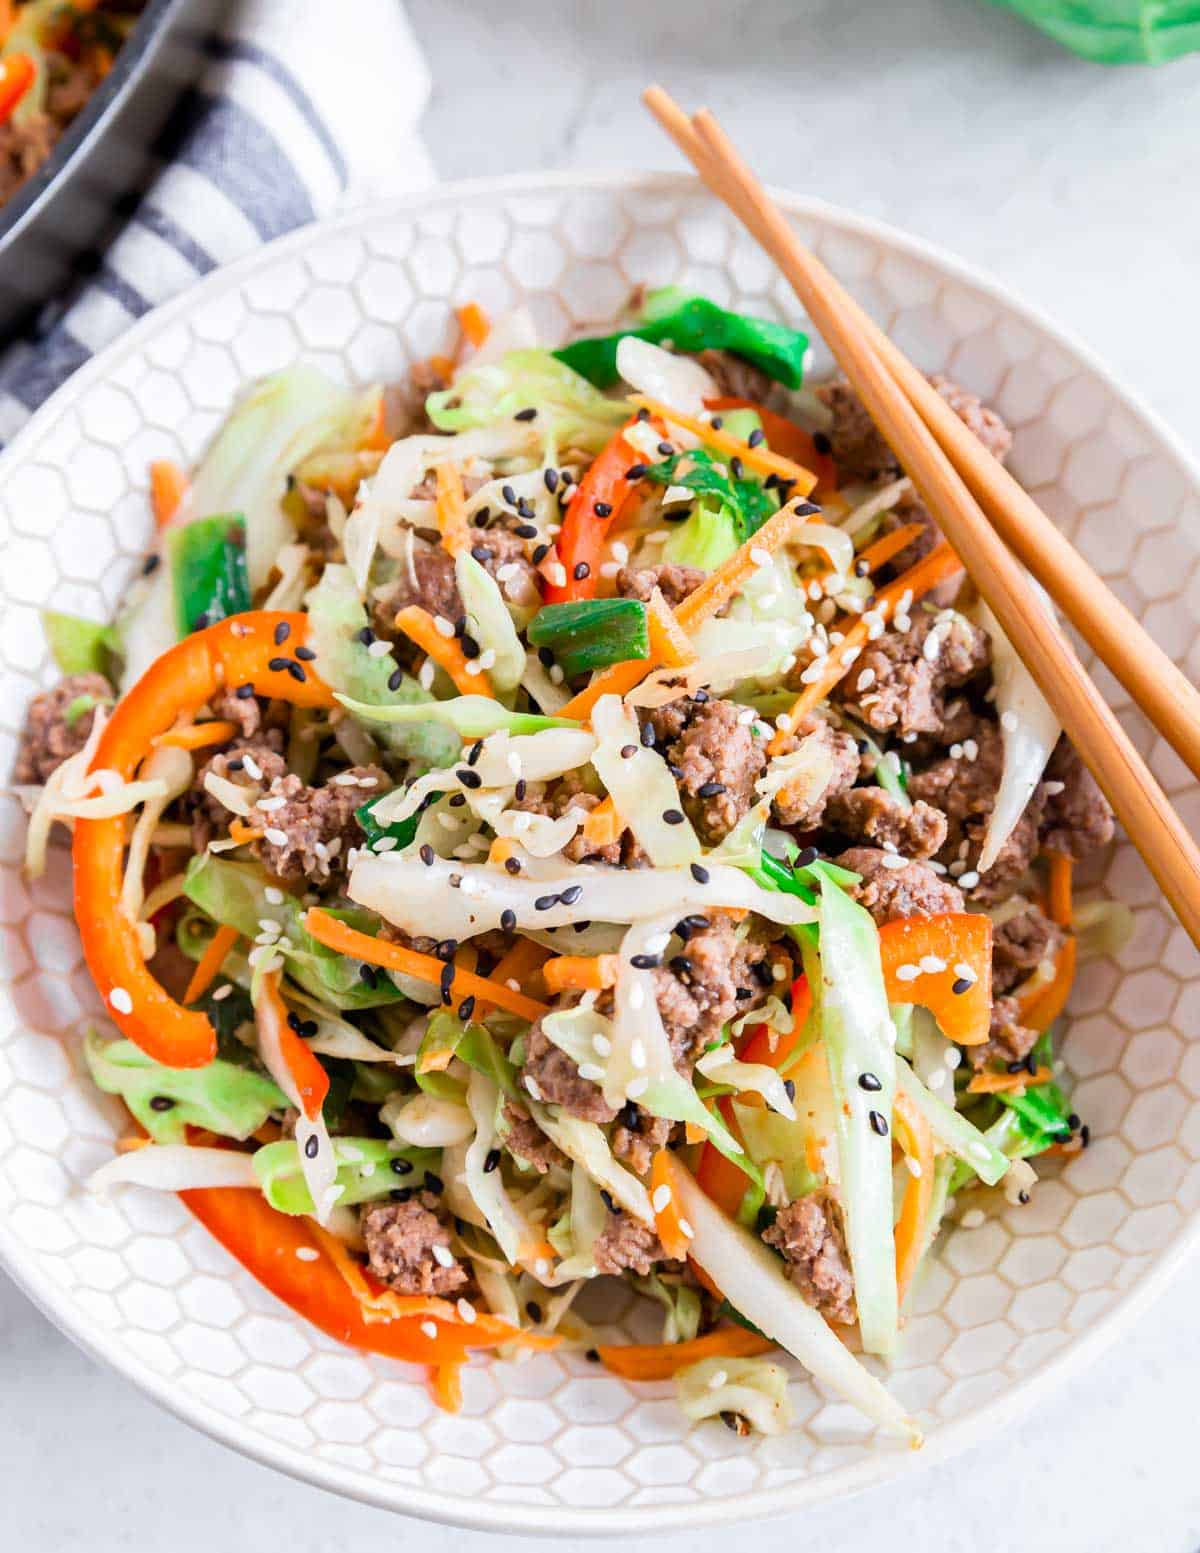 Ground beef and cabbage skillet dinner in a bowl with chopstick on the side.